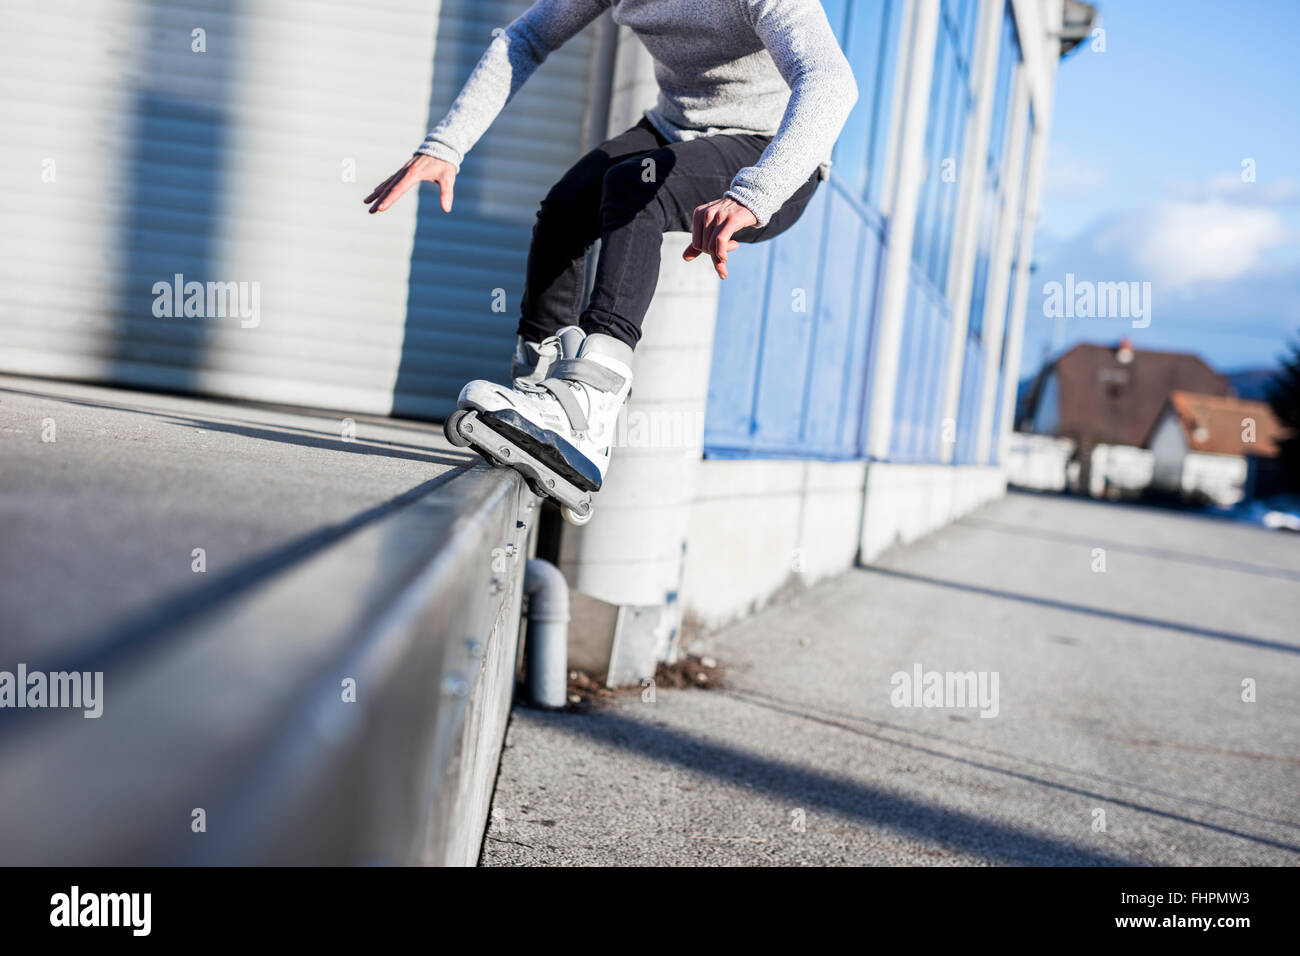 Low section of young man doing a trick on inline skates Stock Photo